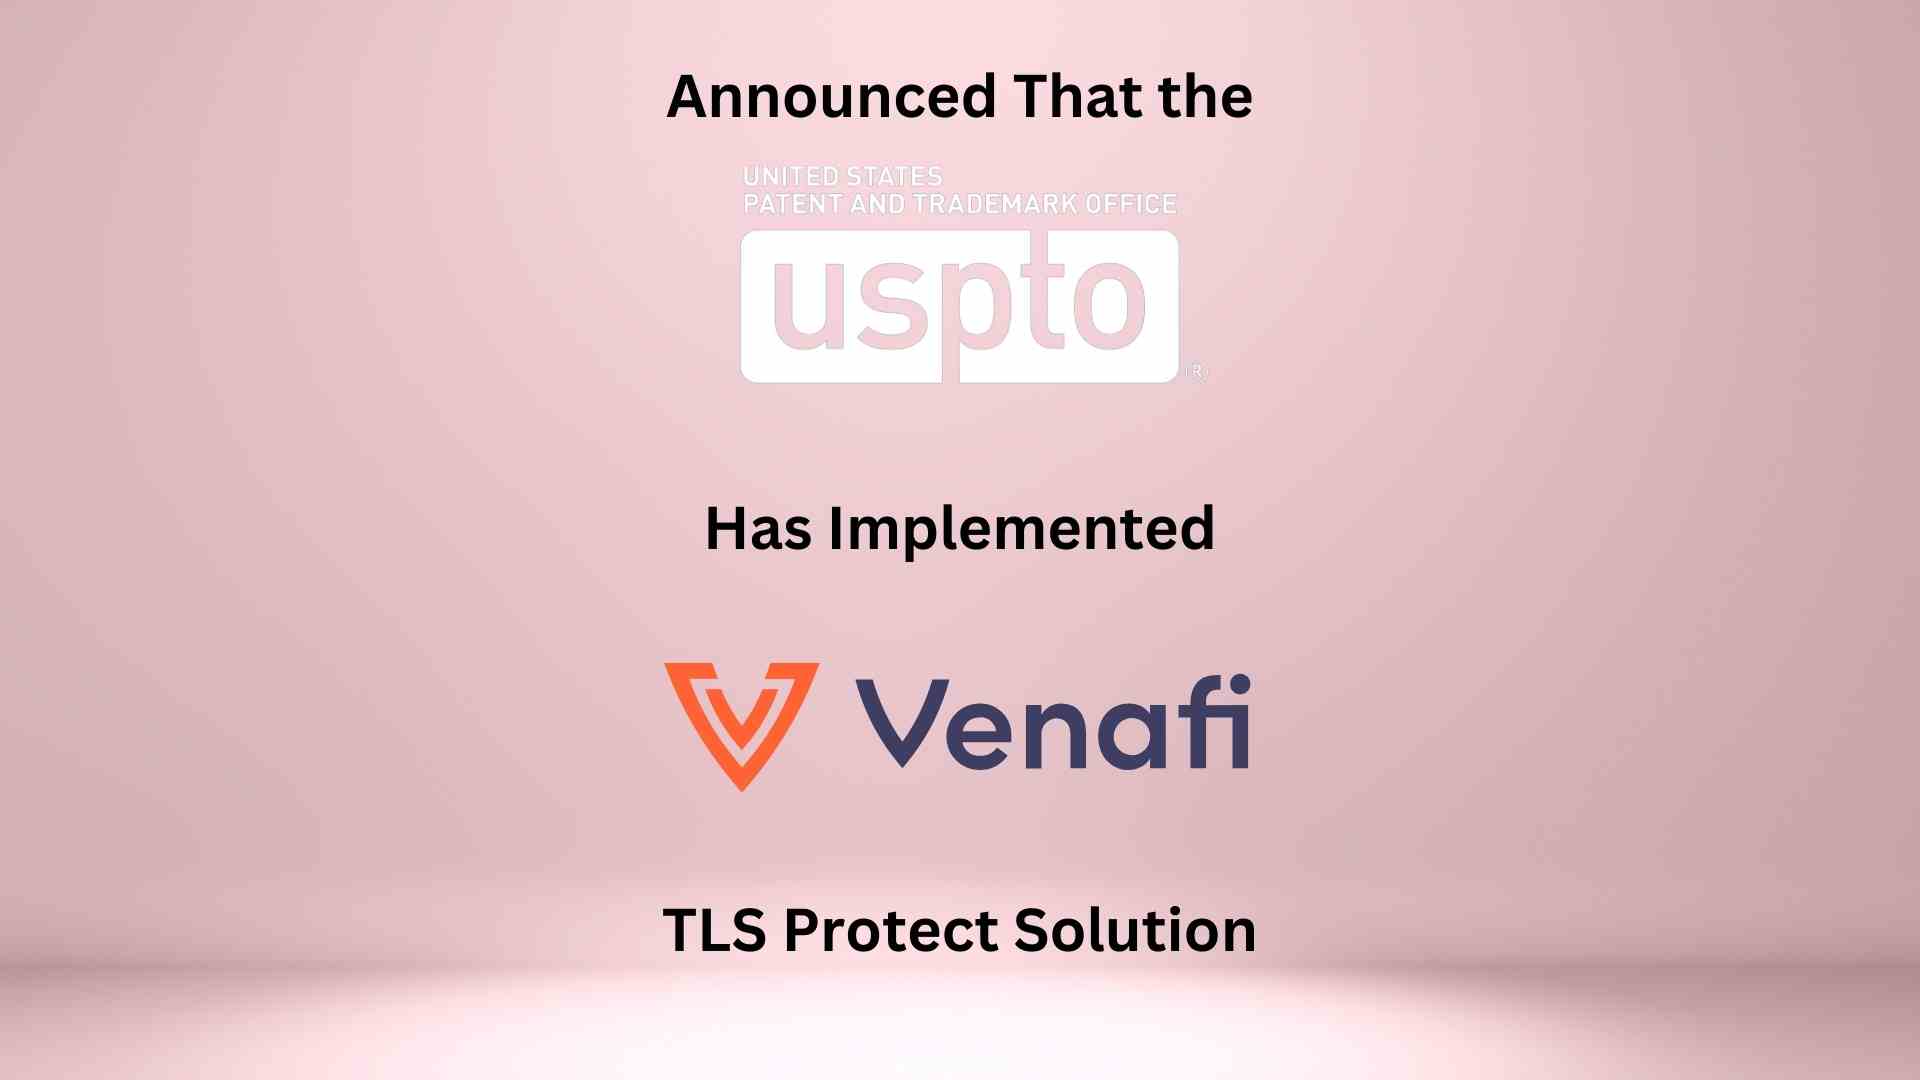 United States Patent and Trademark Office Takes Innovative Approach to Machine Identity Management With Venafi